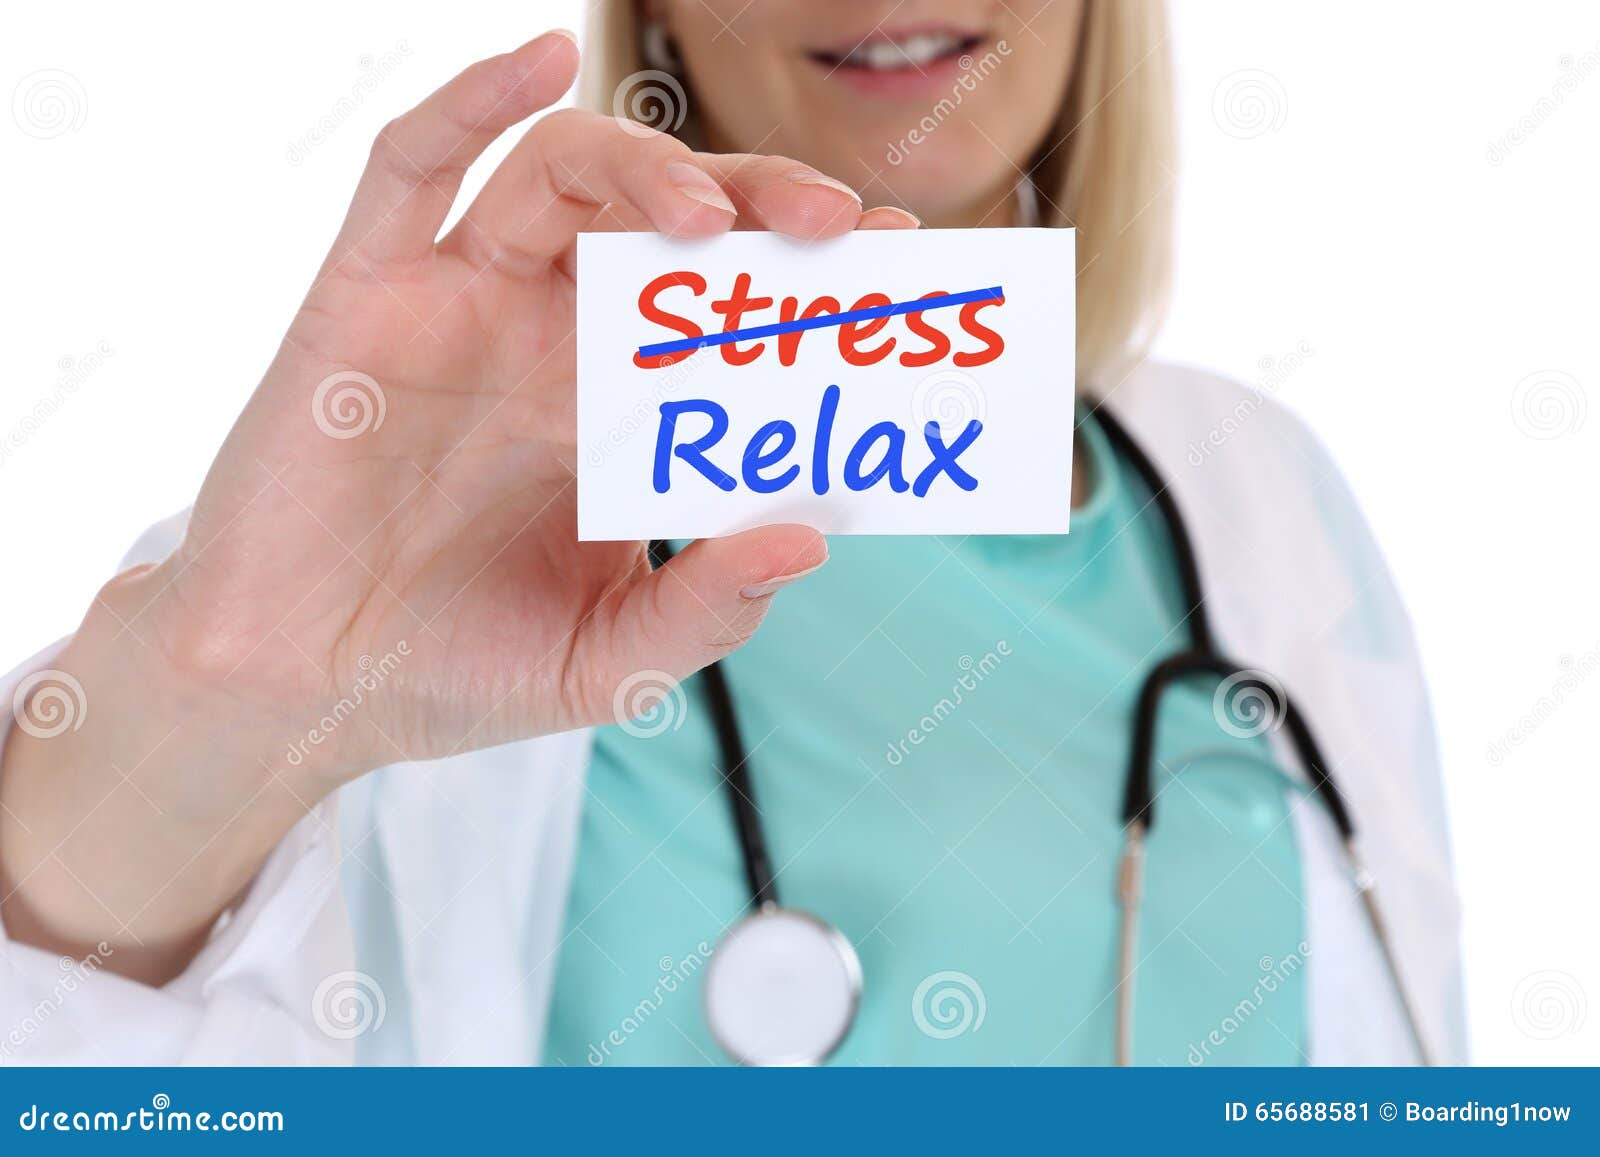 stress stressed relax relaxed burnout ill illness healthy doctor